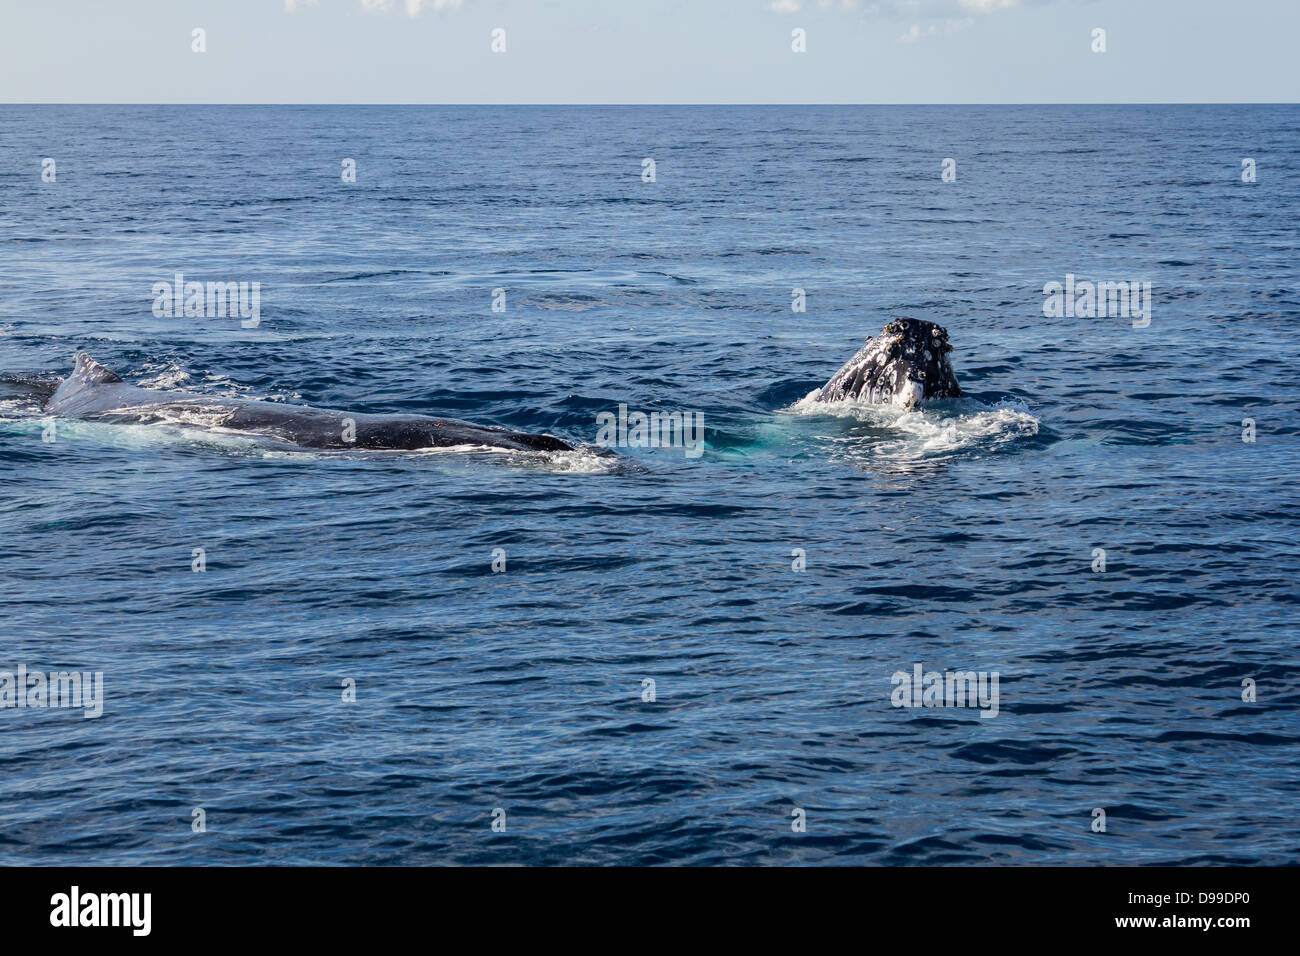 Two humpback whales. Stock Photo